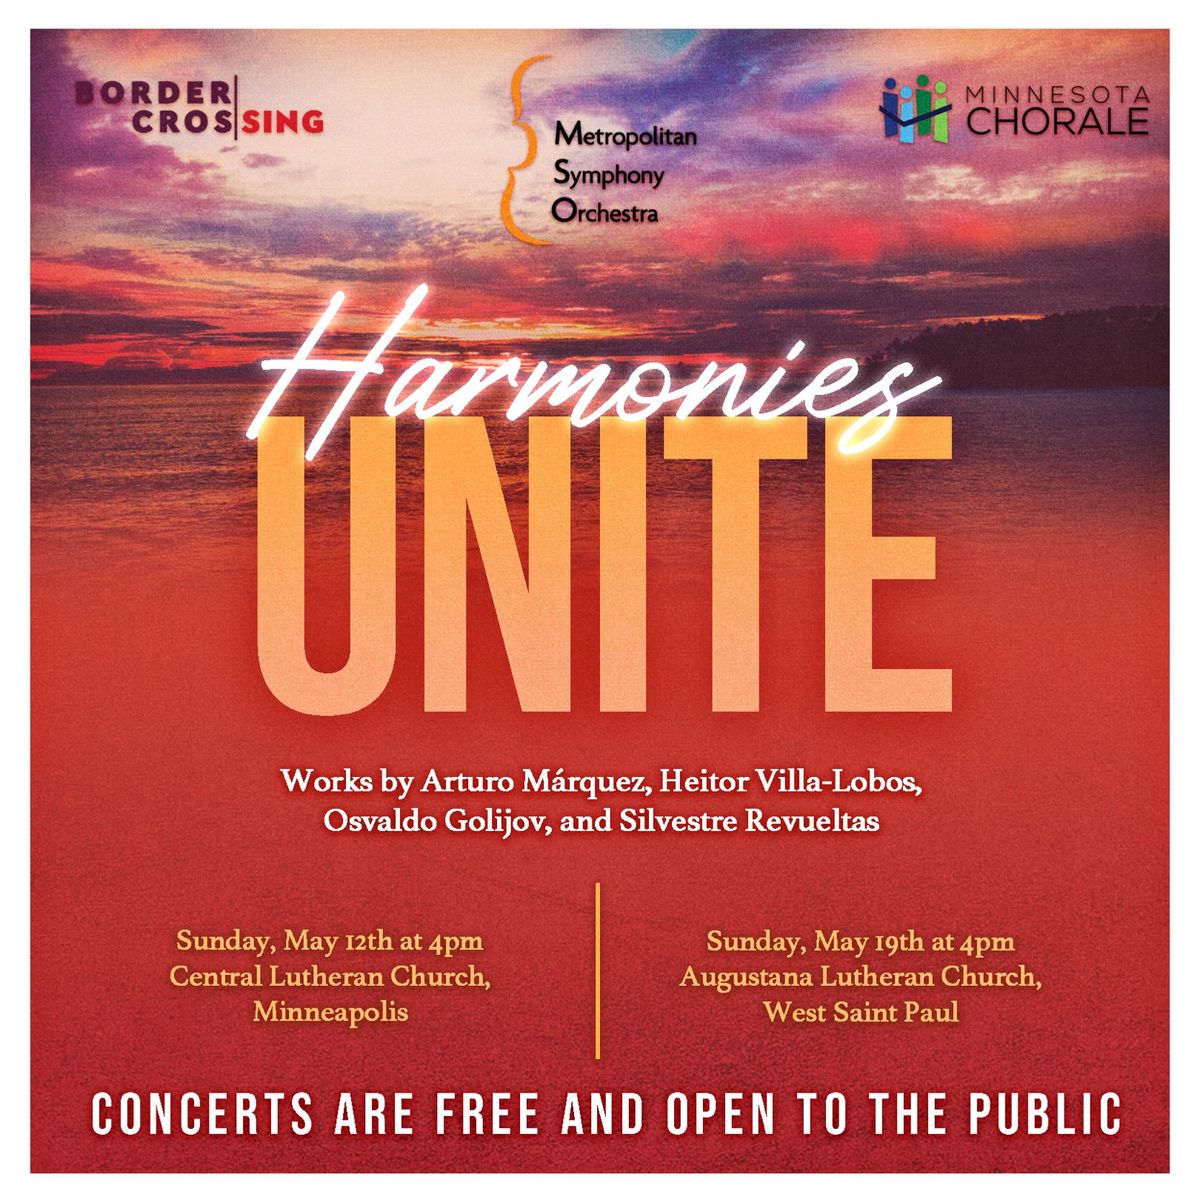 Free Concert: Harmonies Unite with the MSO and Border CrosSing